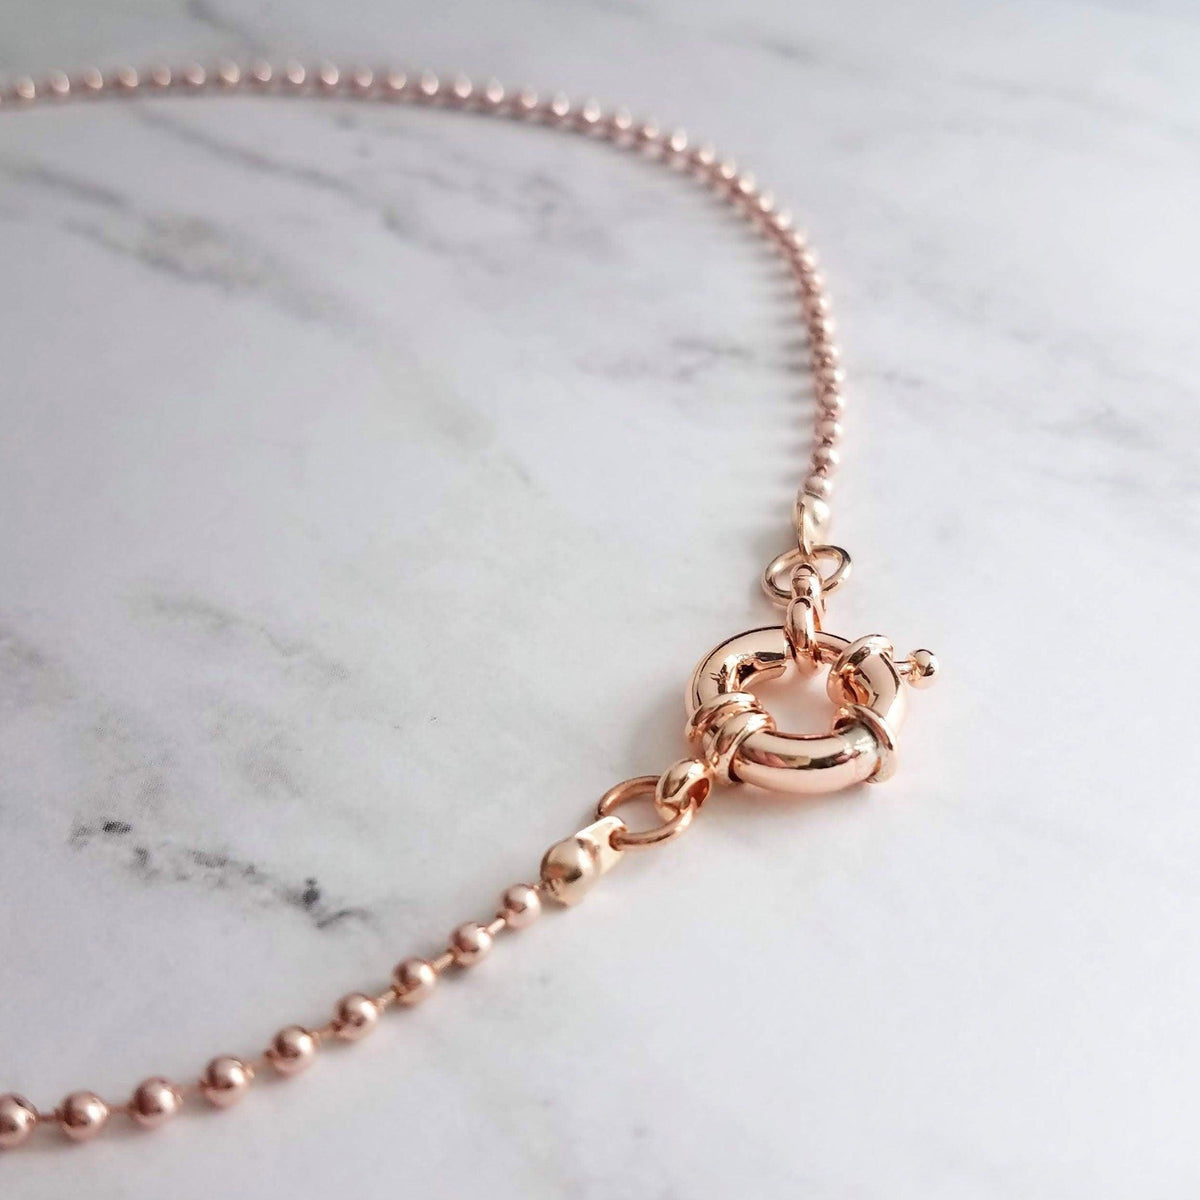 Ball Chain Replacement Necklace in Stainless Steel and Rose Gold